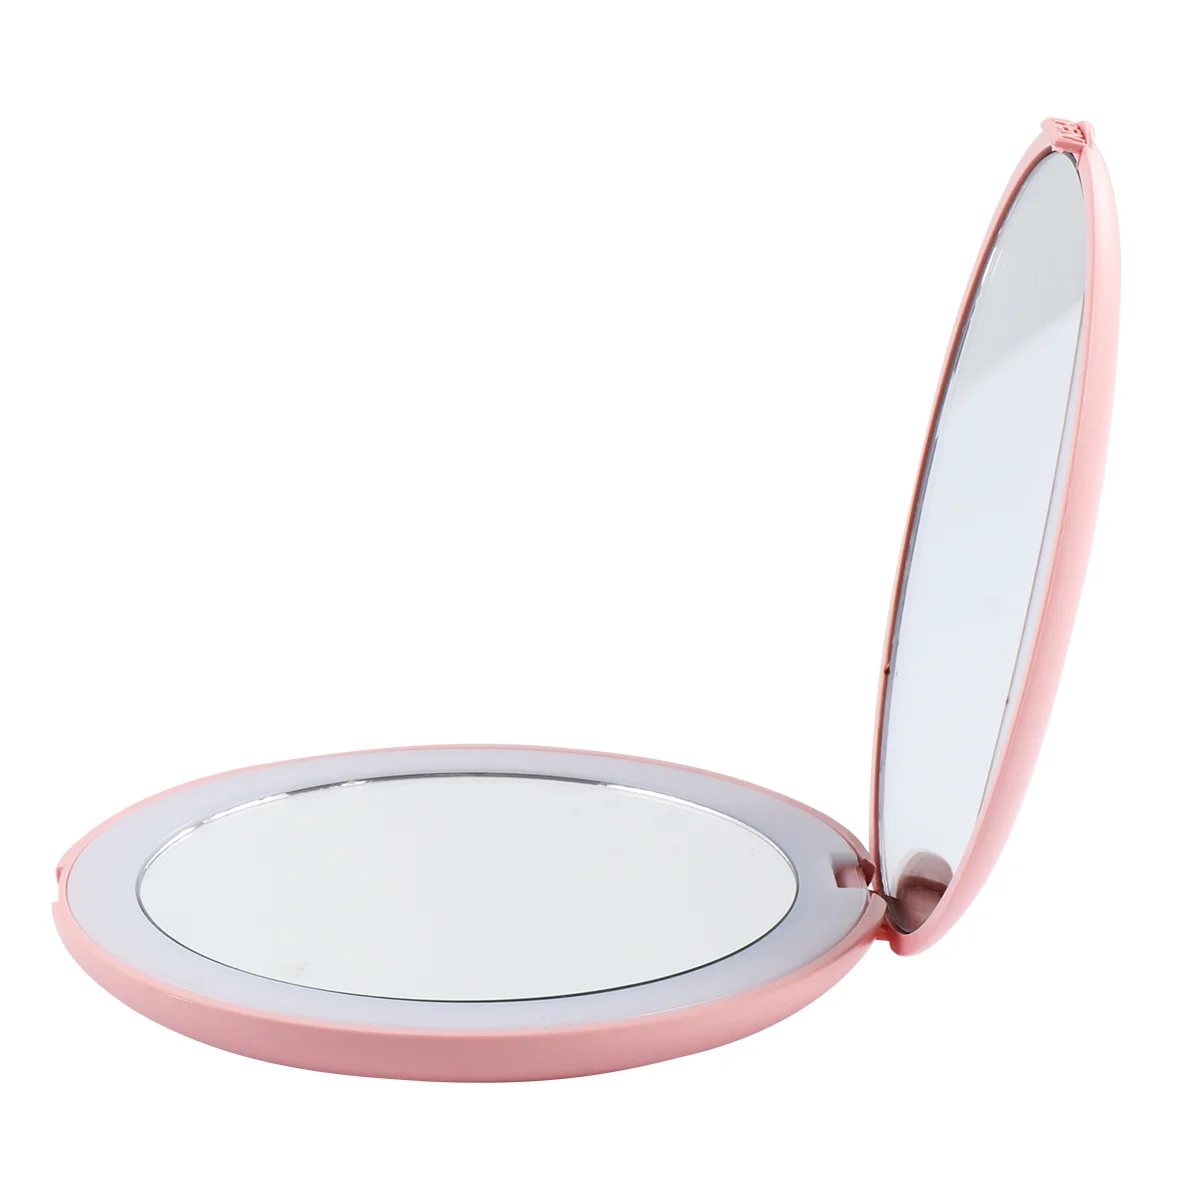 

10 Times Magnifying Makeup Mirror Folding Pocket LED Mini Round Aluminum Magnification Tool Travel Glass Mirrors